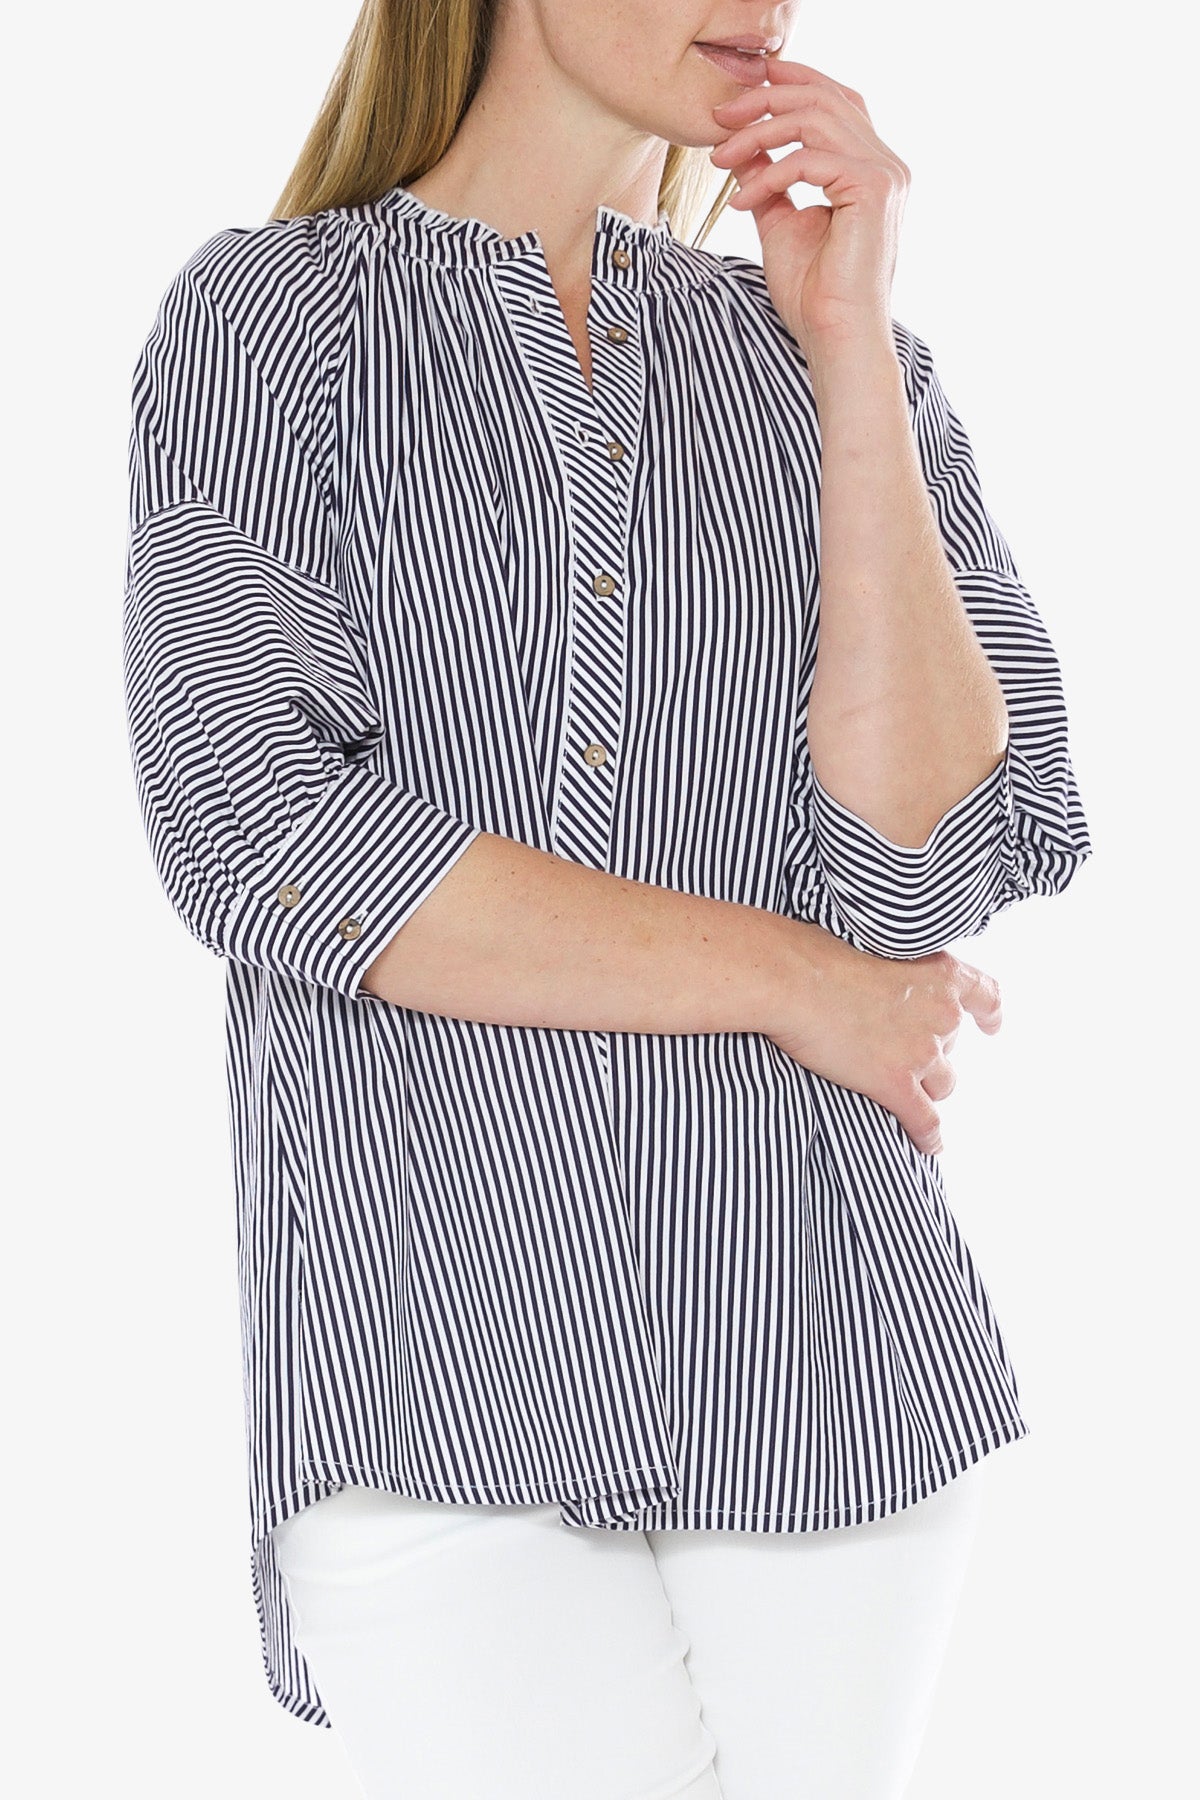 Striped Shirt White and Navy